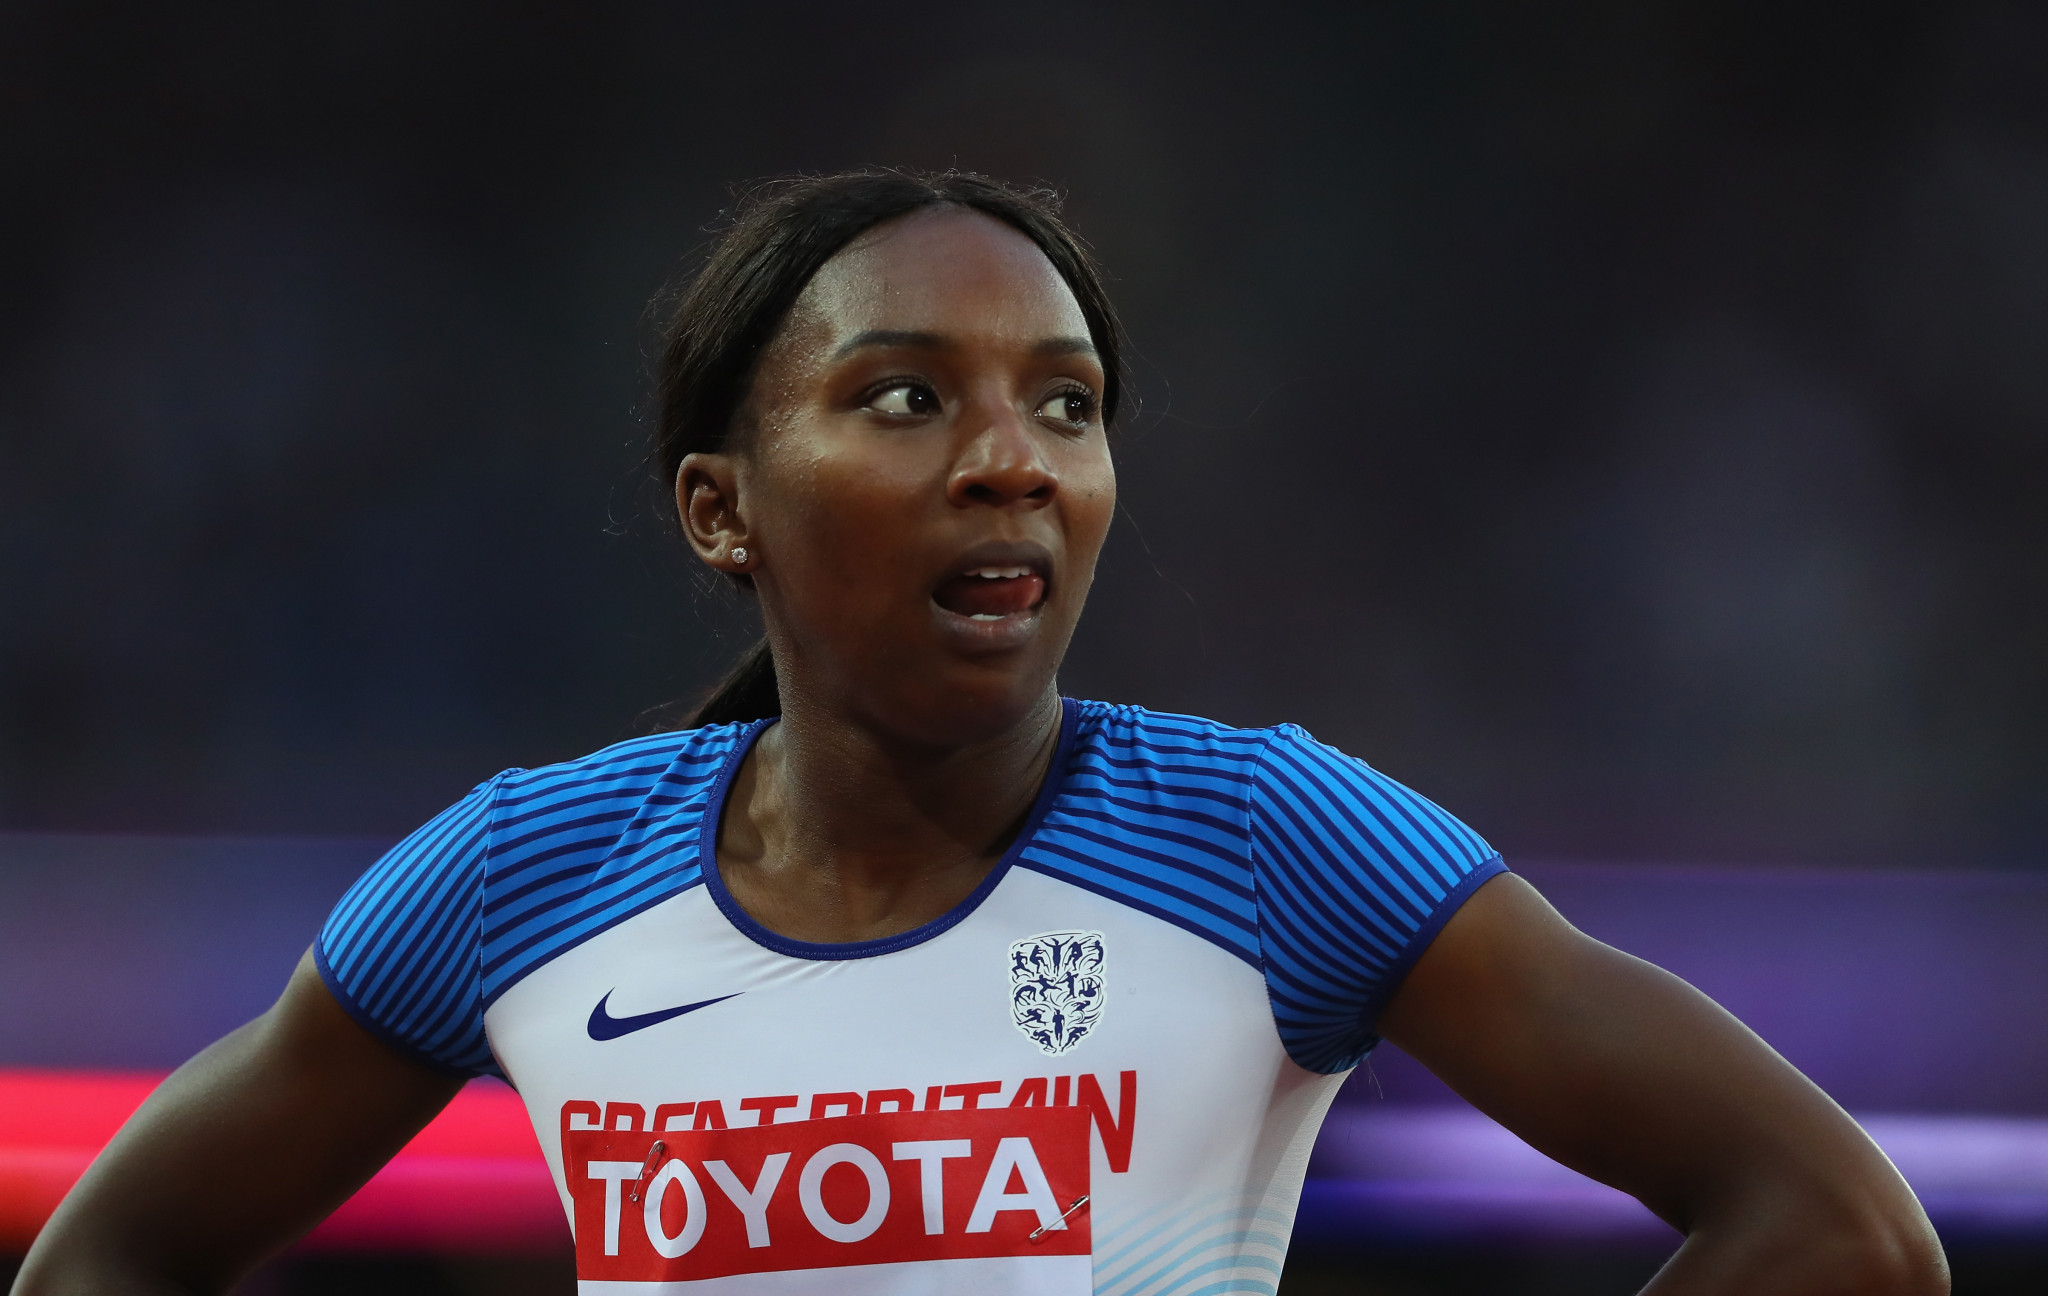 Metropolitan Police apologise to British sprinter Williams over stop and search